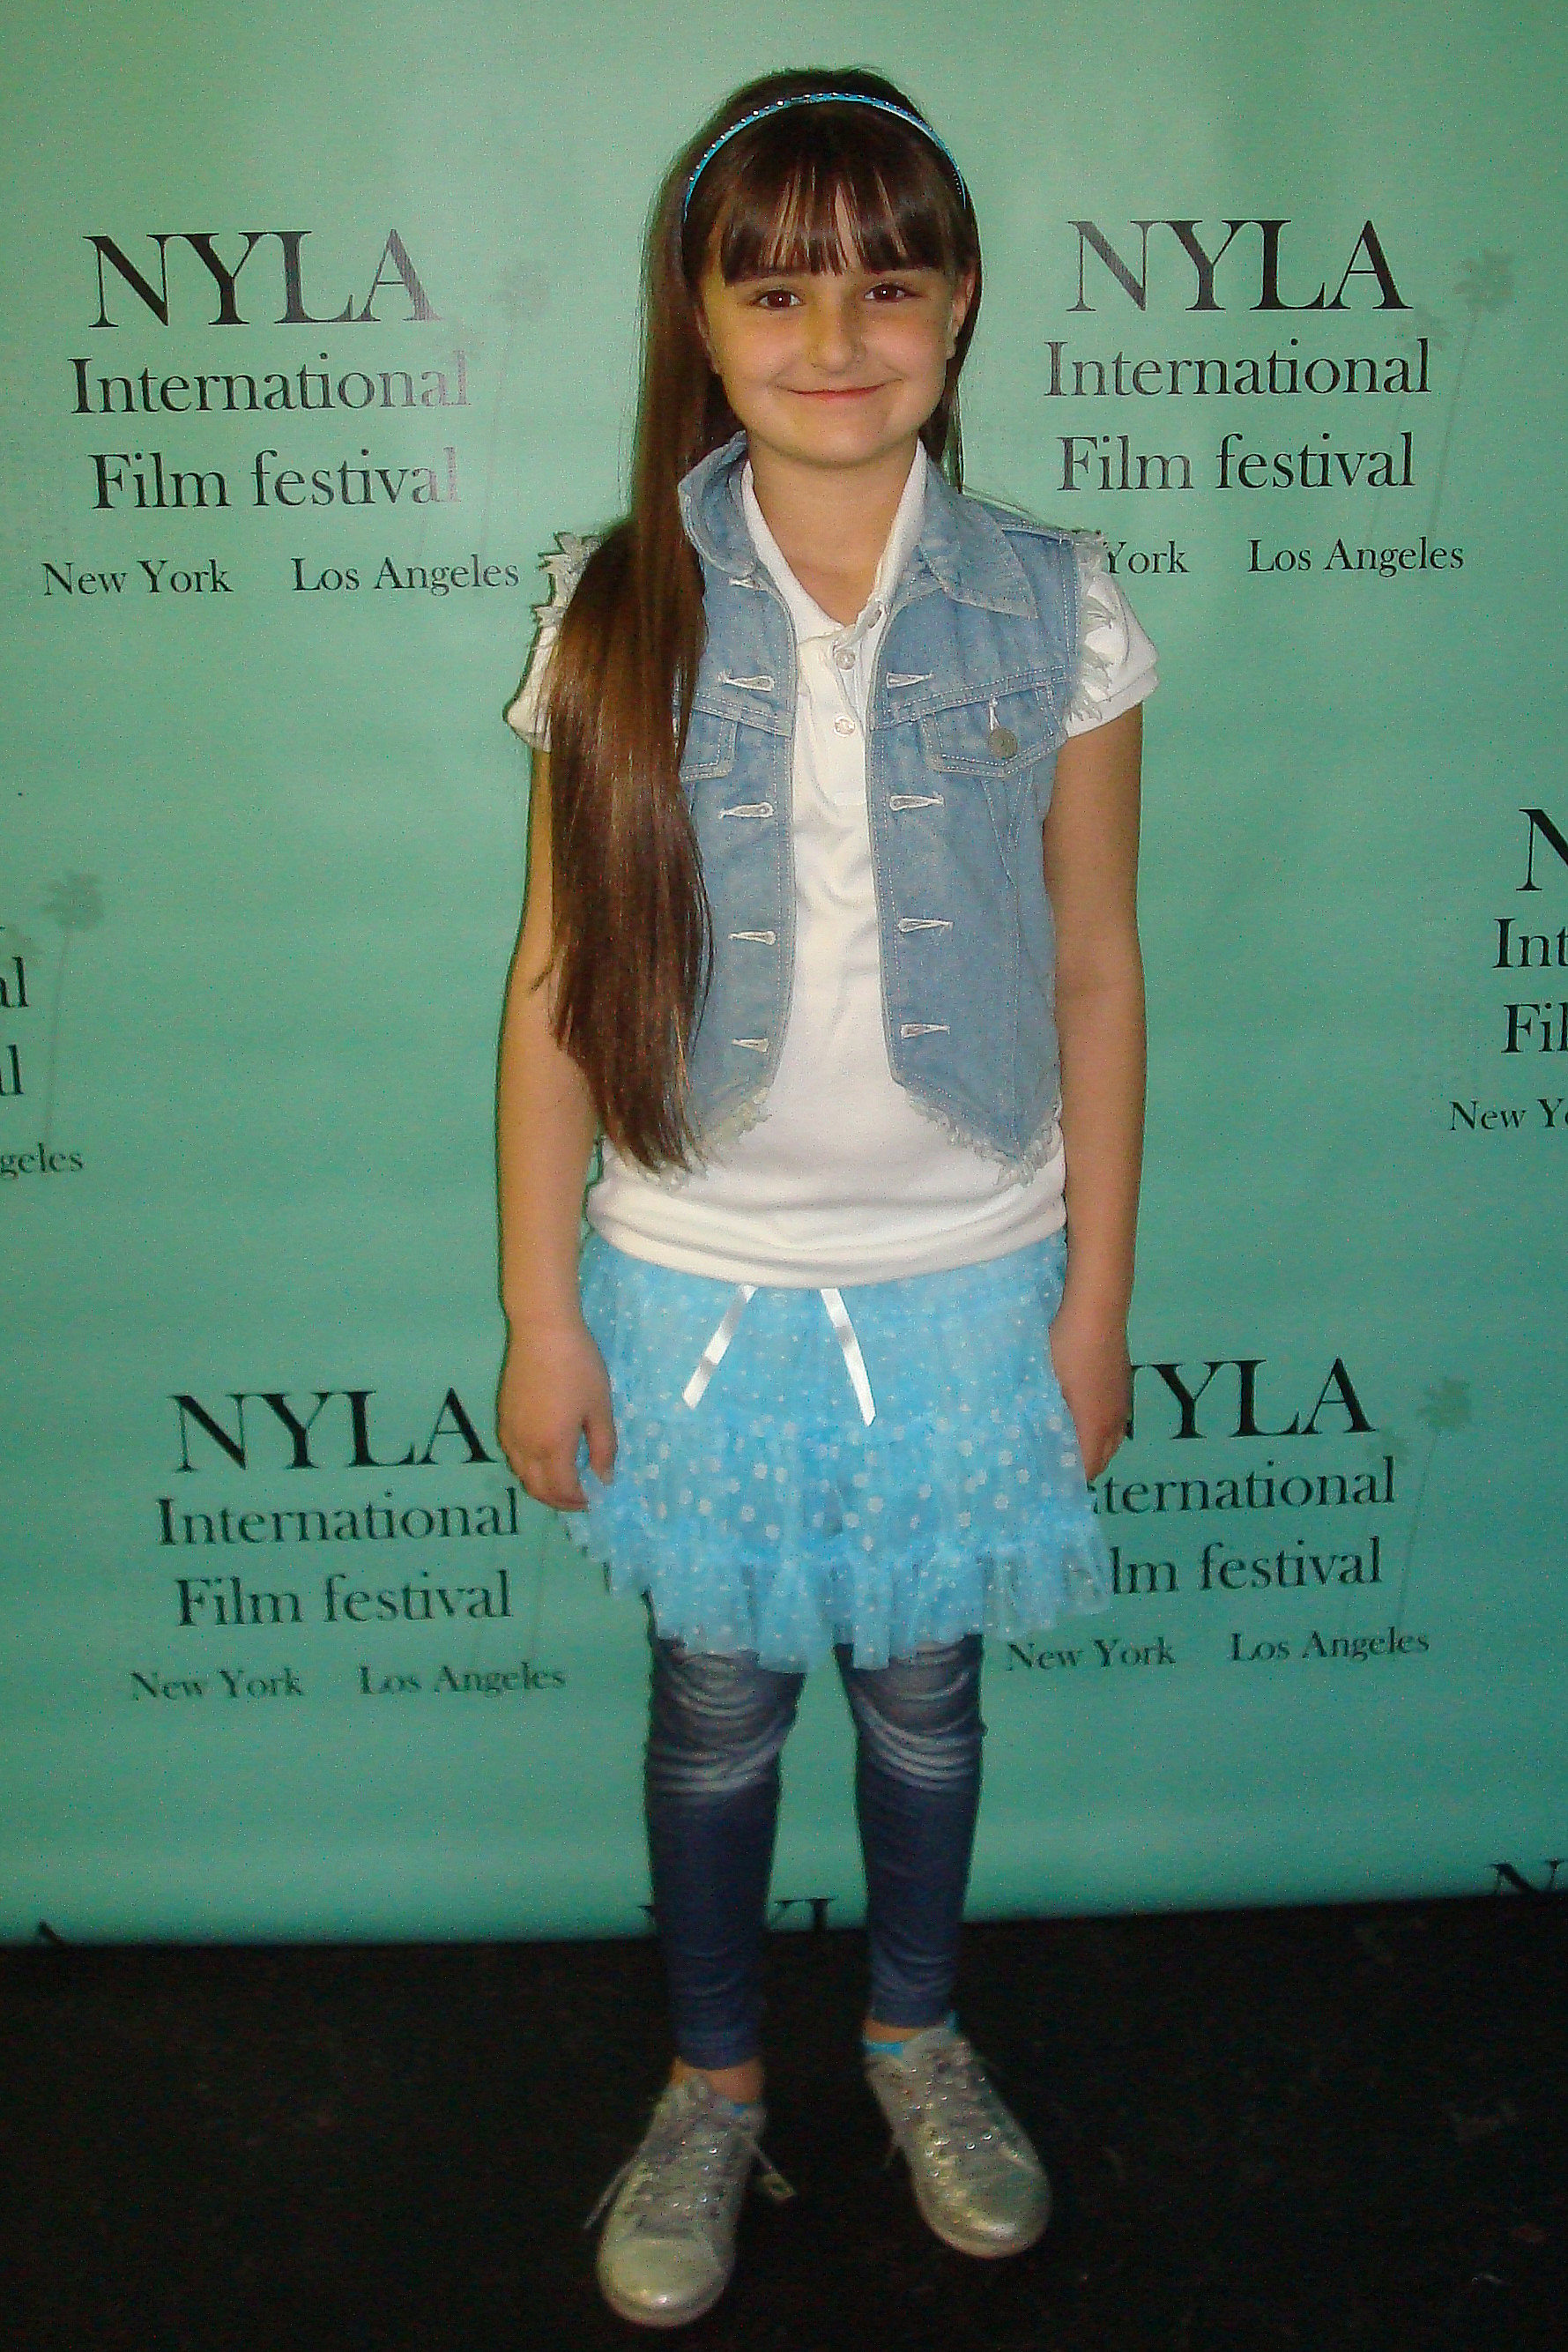 NYLA International Film Festival - Ugly Me by Hyangil Kim - Lead role of Young Susan